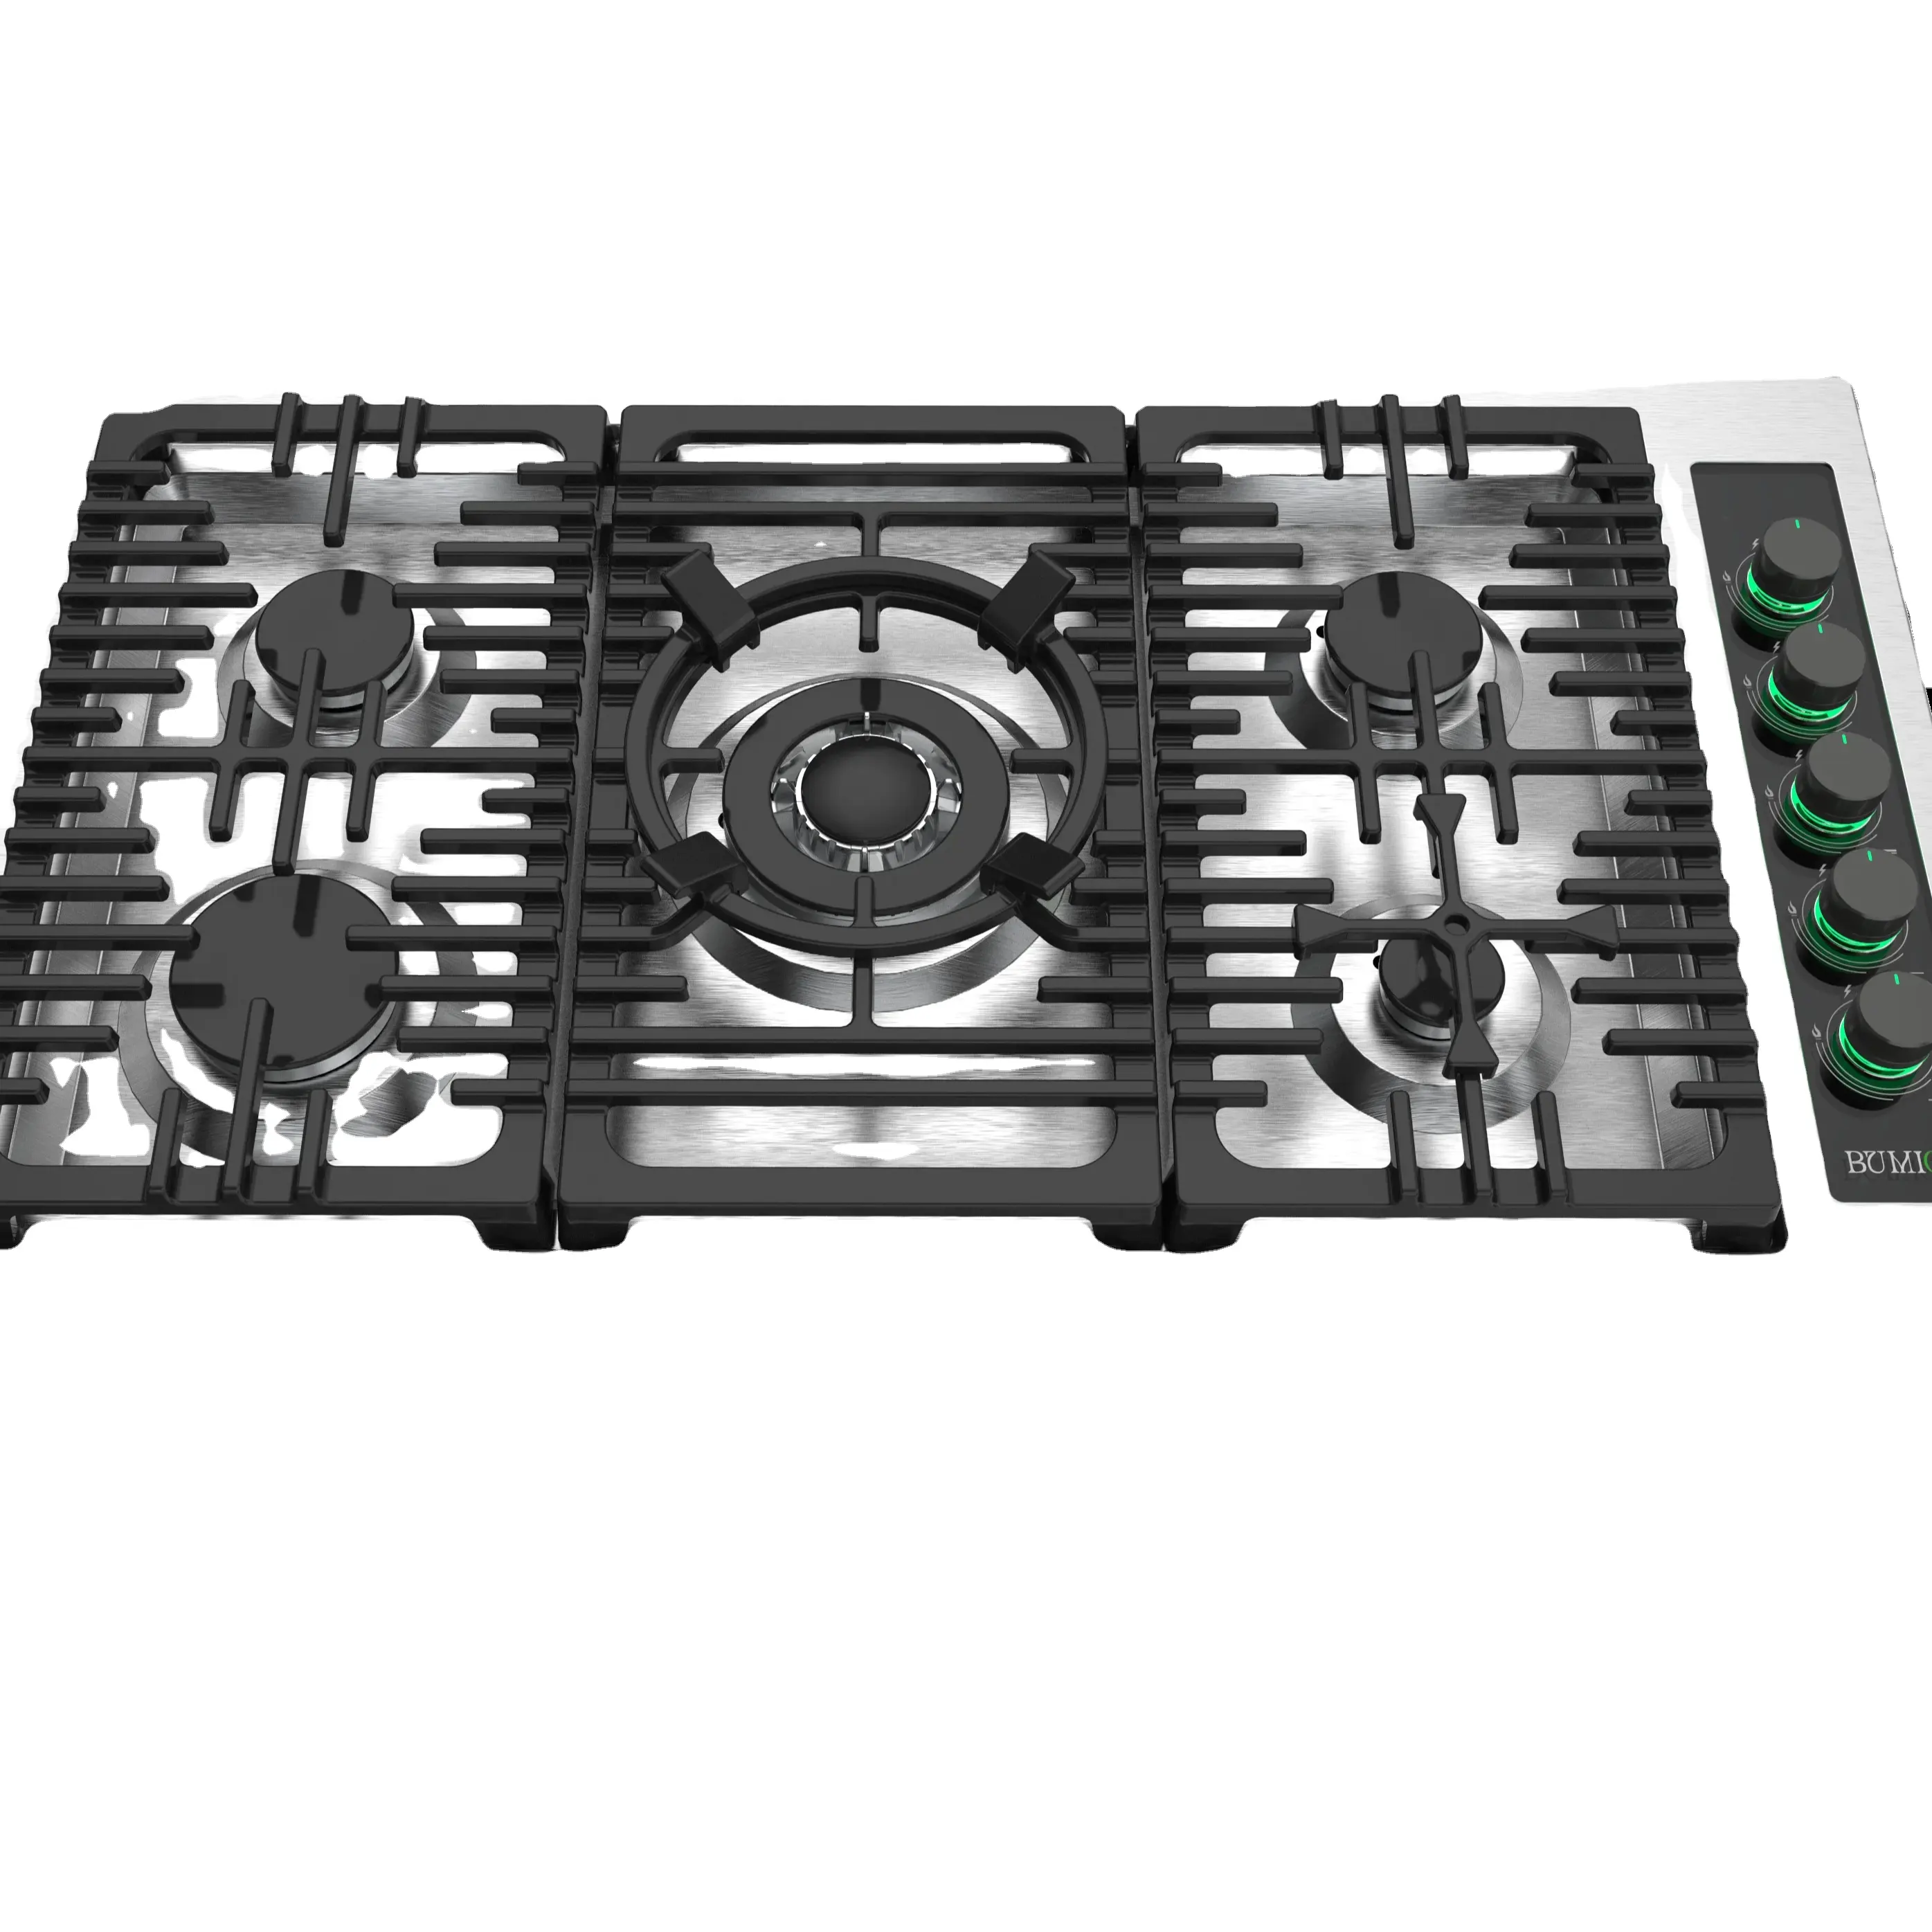 GAS COOKER FOR USA MARKET